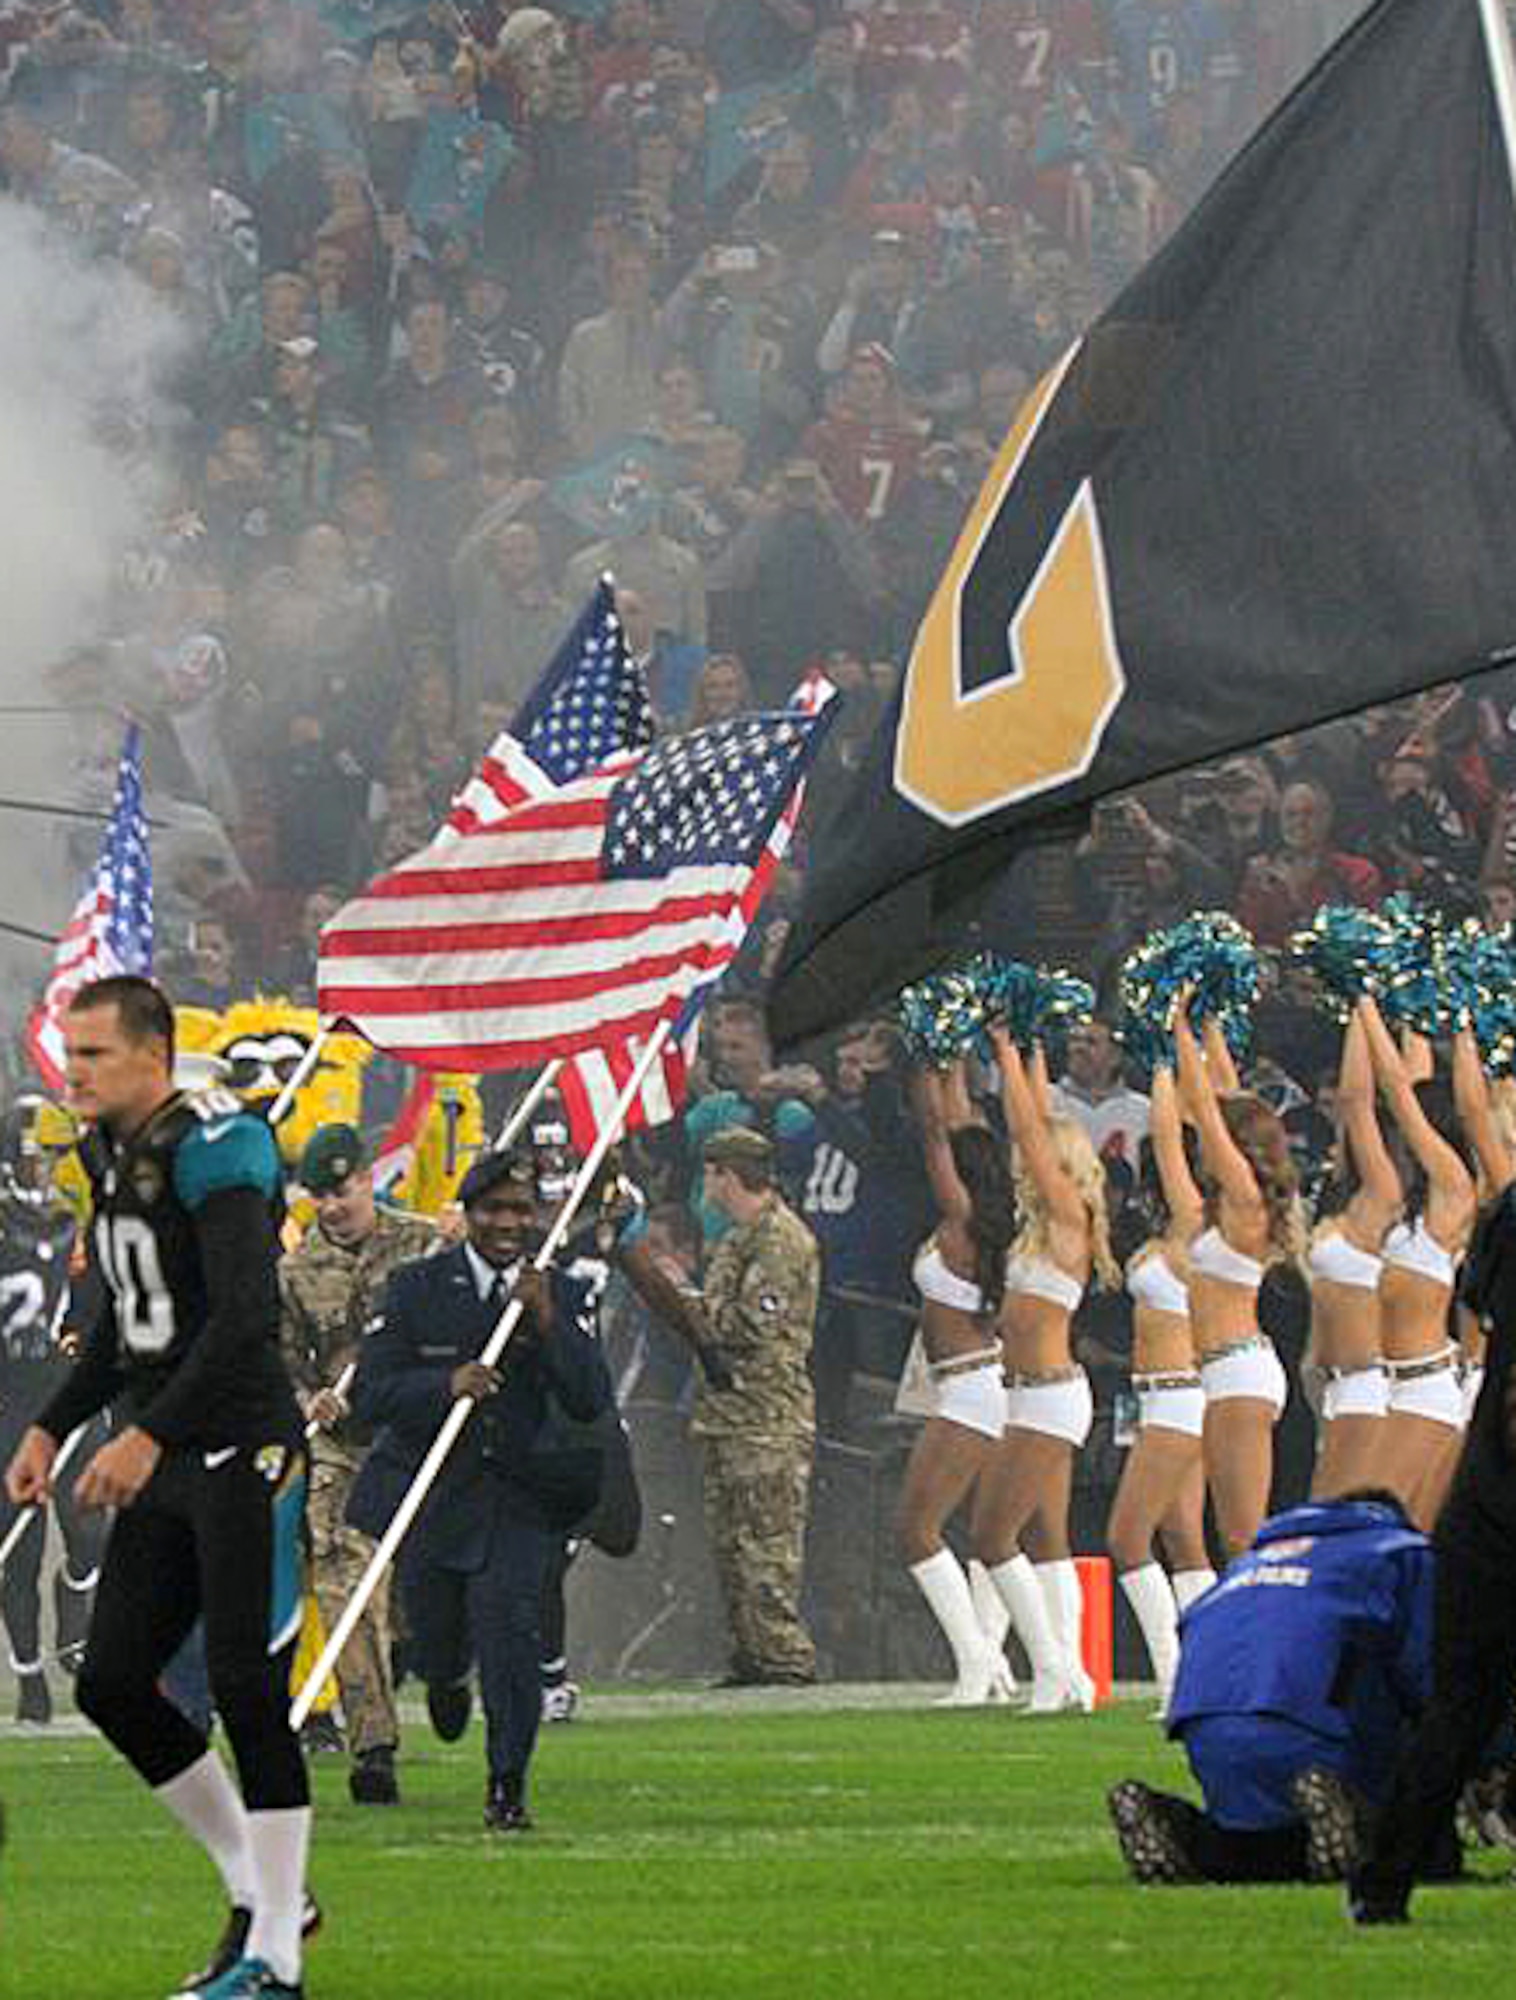 U.S. Air Force Airman 1st Class James Taylor, center, 100th Security Forces Squadron patrolman, leads prior the National Football League’s Jacksonville Jaguars onto the field Oct. 27, 2013, at Wembley Stadium in London, England. Taylor's leadership presented him with this surprise opportunity to represent the U.S. Air Force and his hometown NFL team.  The NFL gave Taylor and U.S. Air Force Airman Sara V. Summers, 48th Security Forces Squadron patrolman from RAF Lakenheath, the opportunity to lead rival football teams onto the field The 501st Combat Support Wing's honor guard team presented the colors while the National Anthem played prior to the start of the game. (U.S. Air Force photo by Tech. Sgt. Chrissy Best/Released)